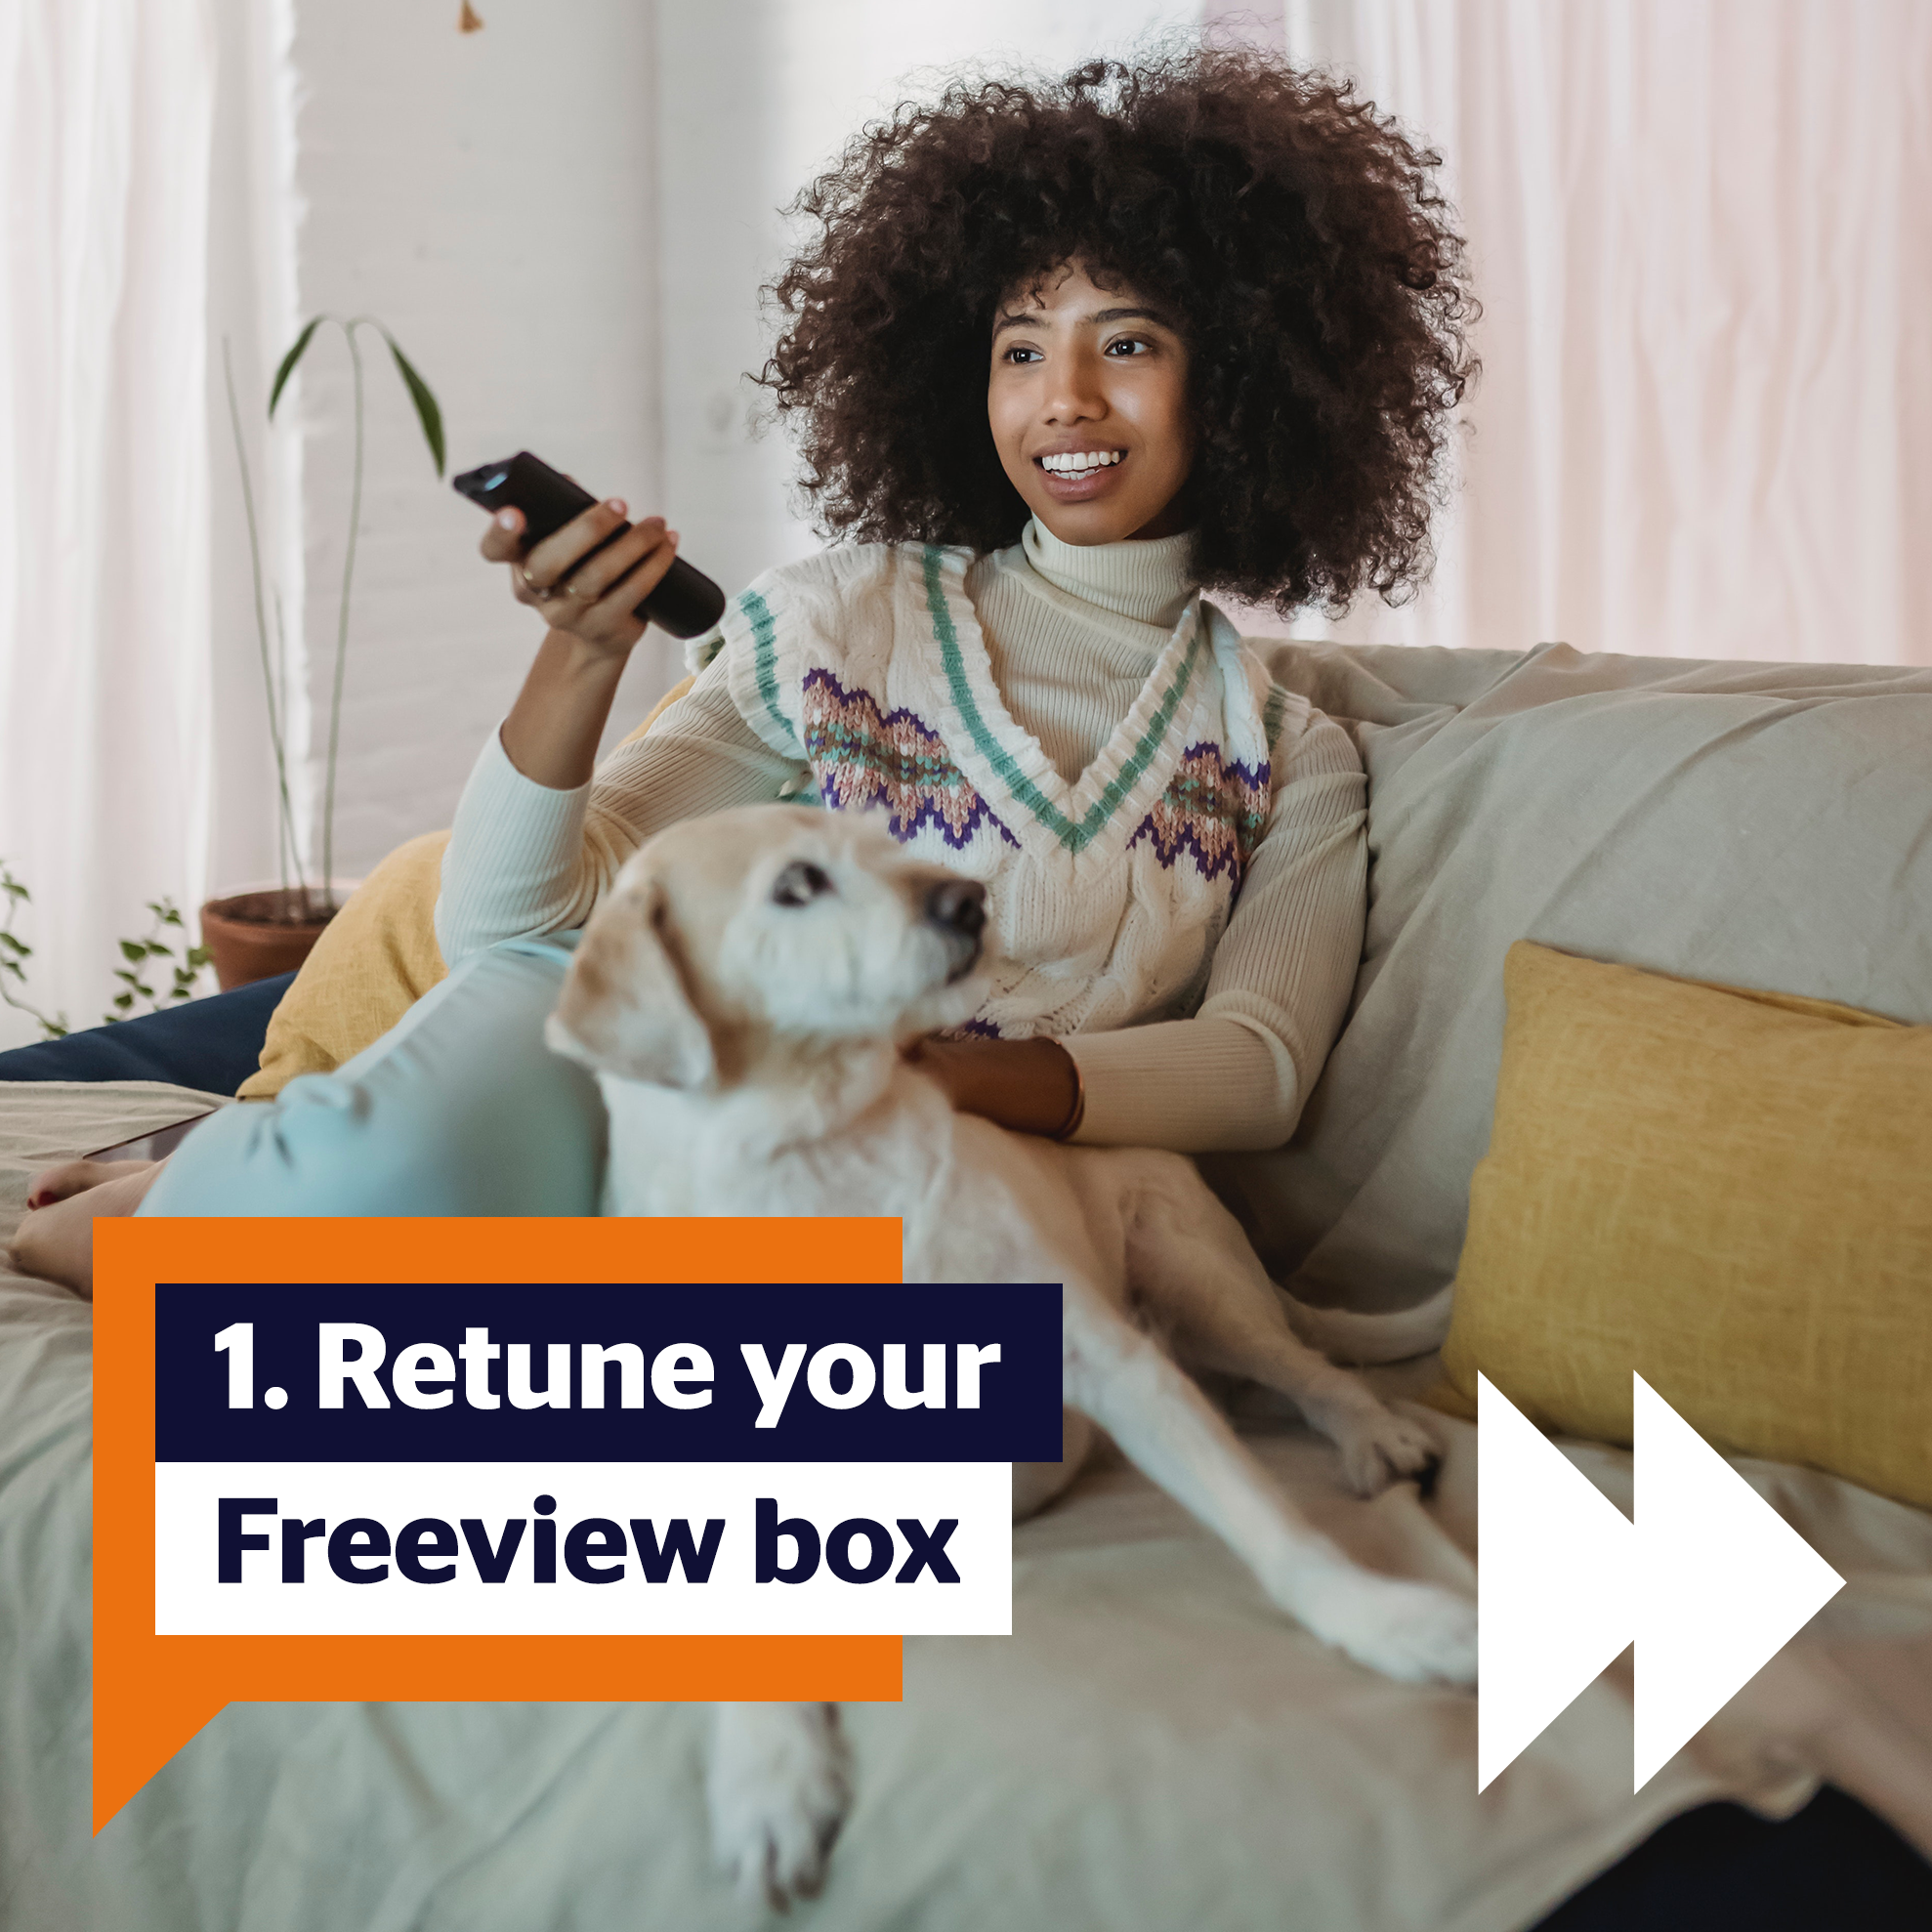 Step 1: Retune your Freeview Box. Image of woman with afro smiling holding a remote control and petting a white Labrador on a sofa.